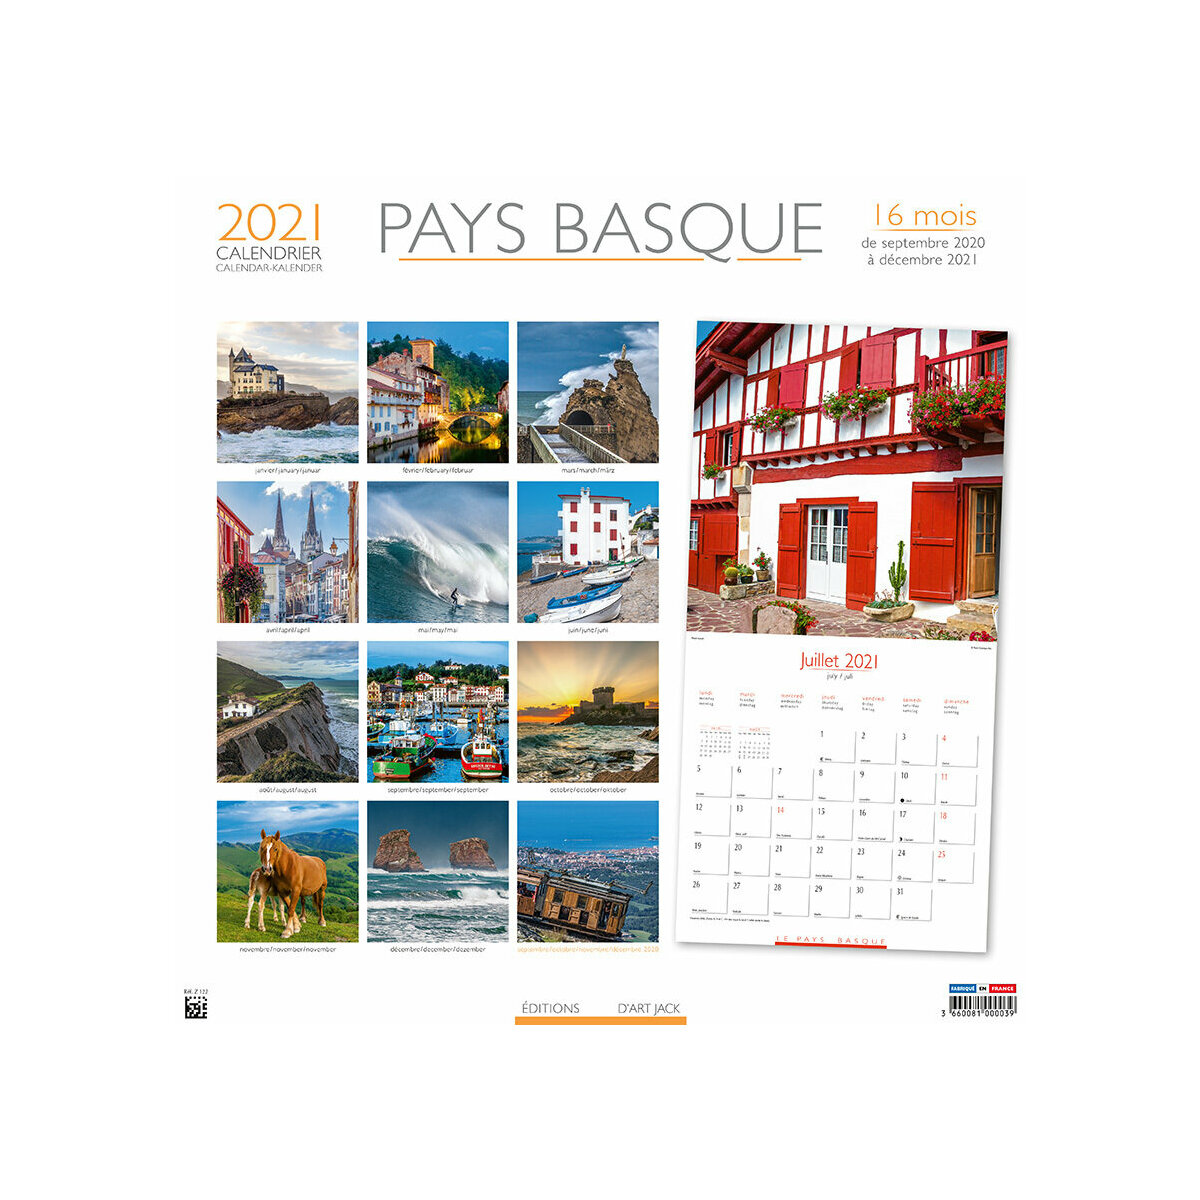 Calendrier 2021 Pays basque chevaux